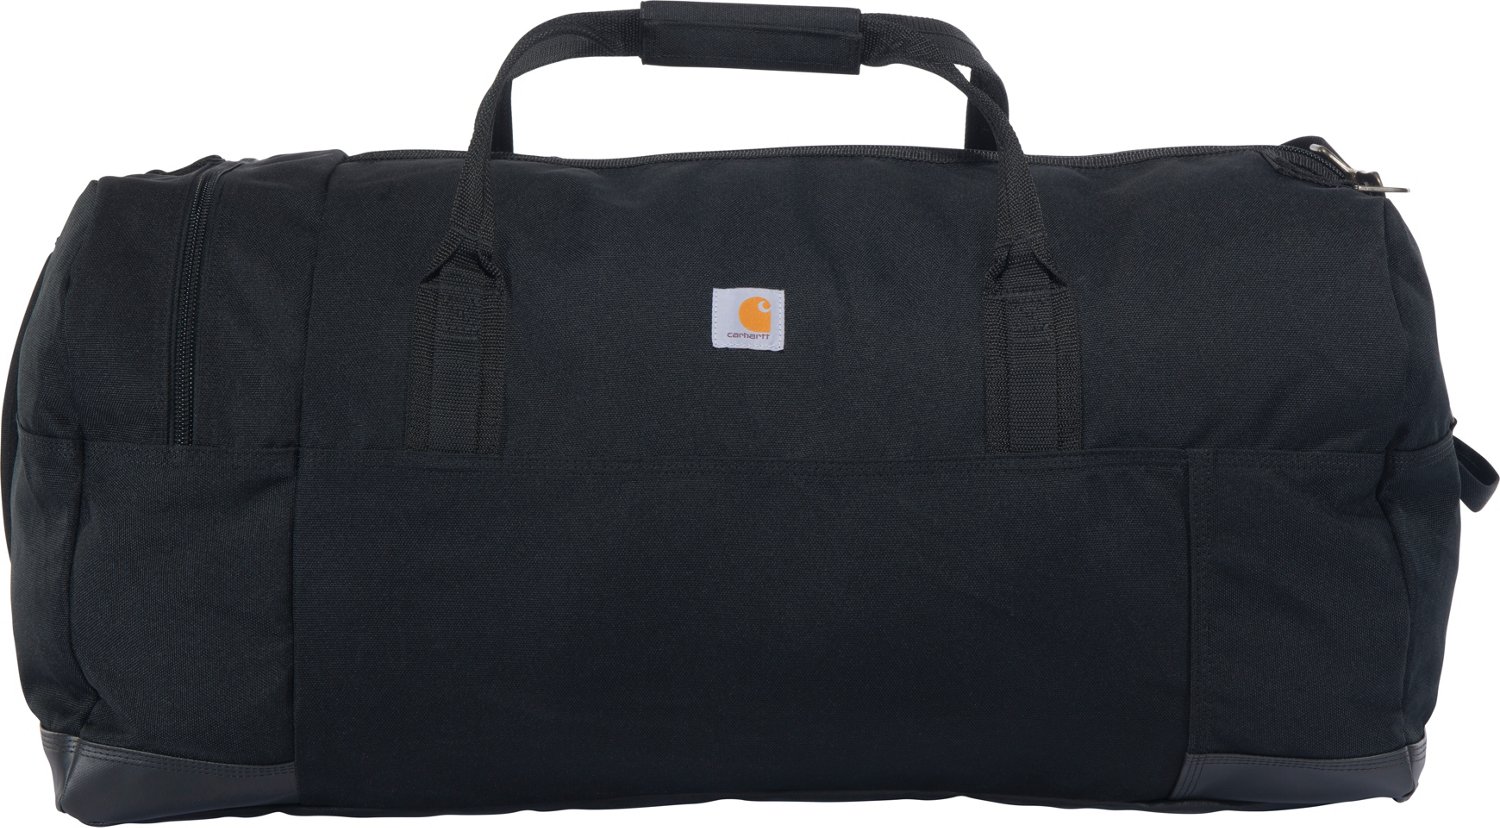 Carhartt Classic 120L Bag | Free Shipping at Academy